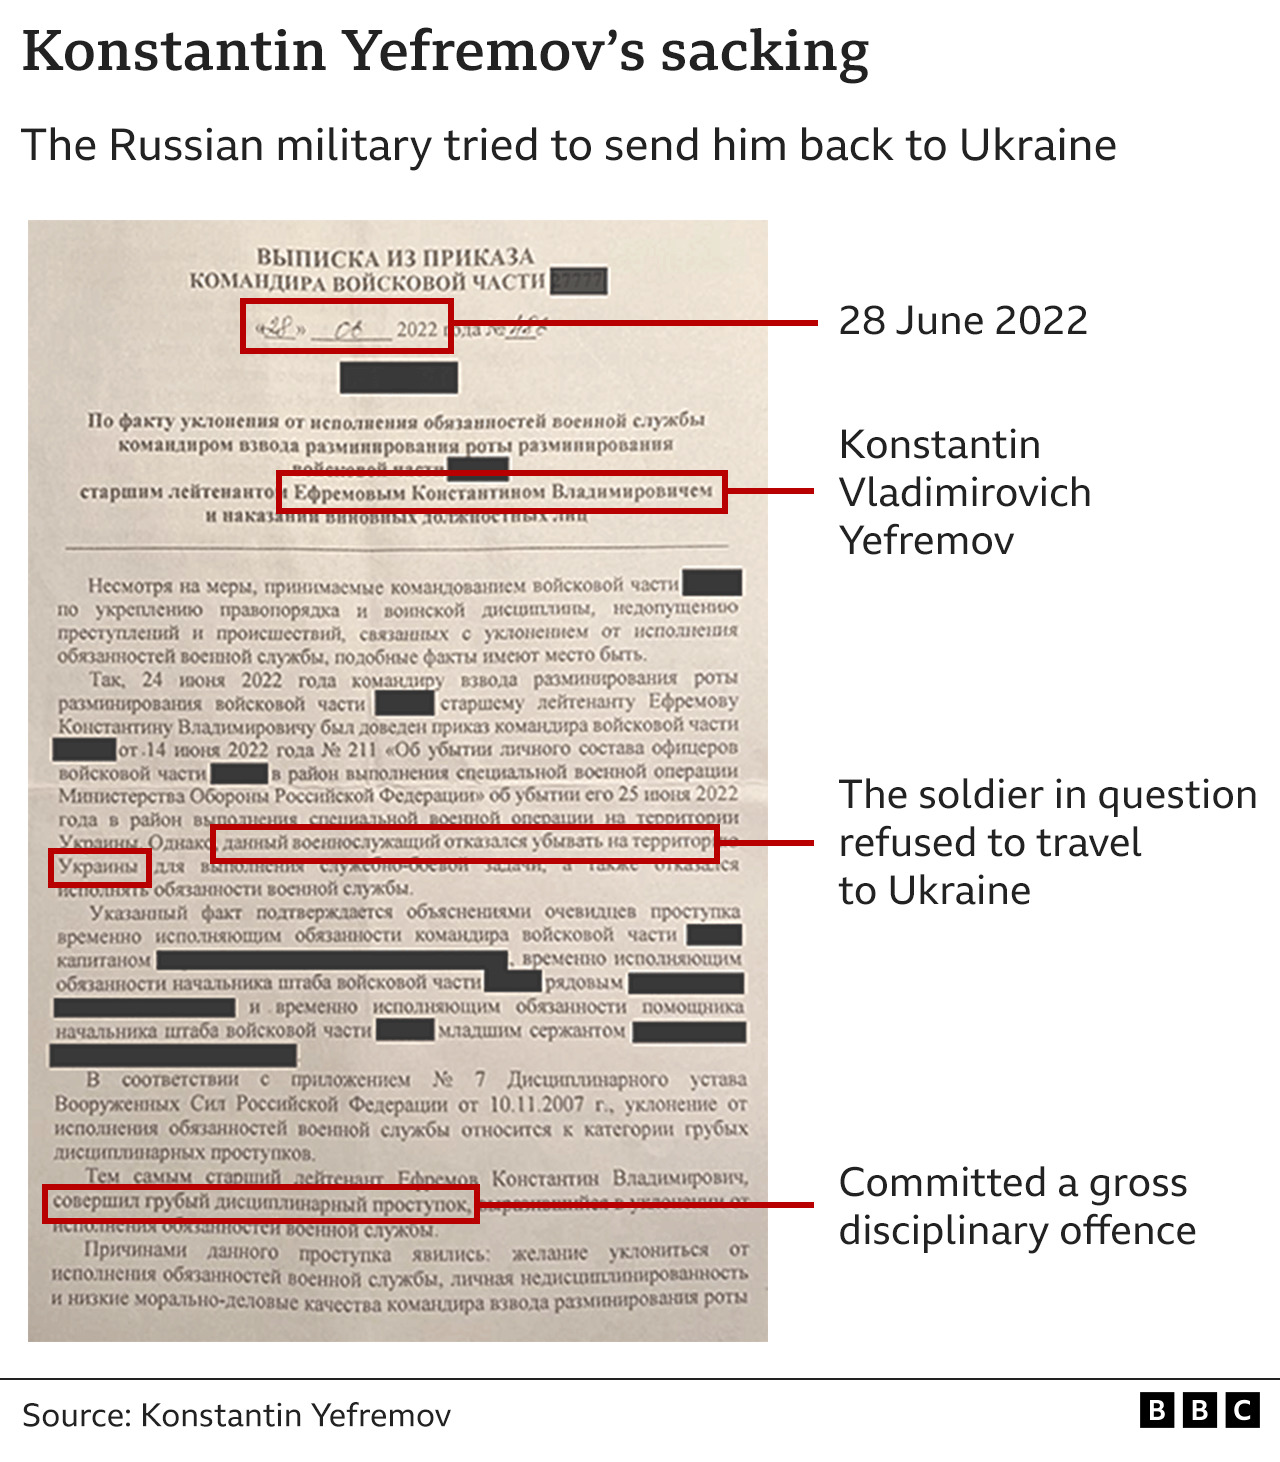 One of Konstantin Yefremov's military documents explaining his dismissal from the Russian army - it says he "committed a gross disciplinary offence"